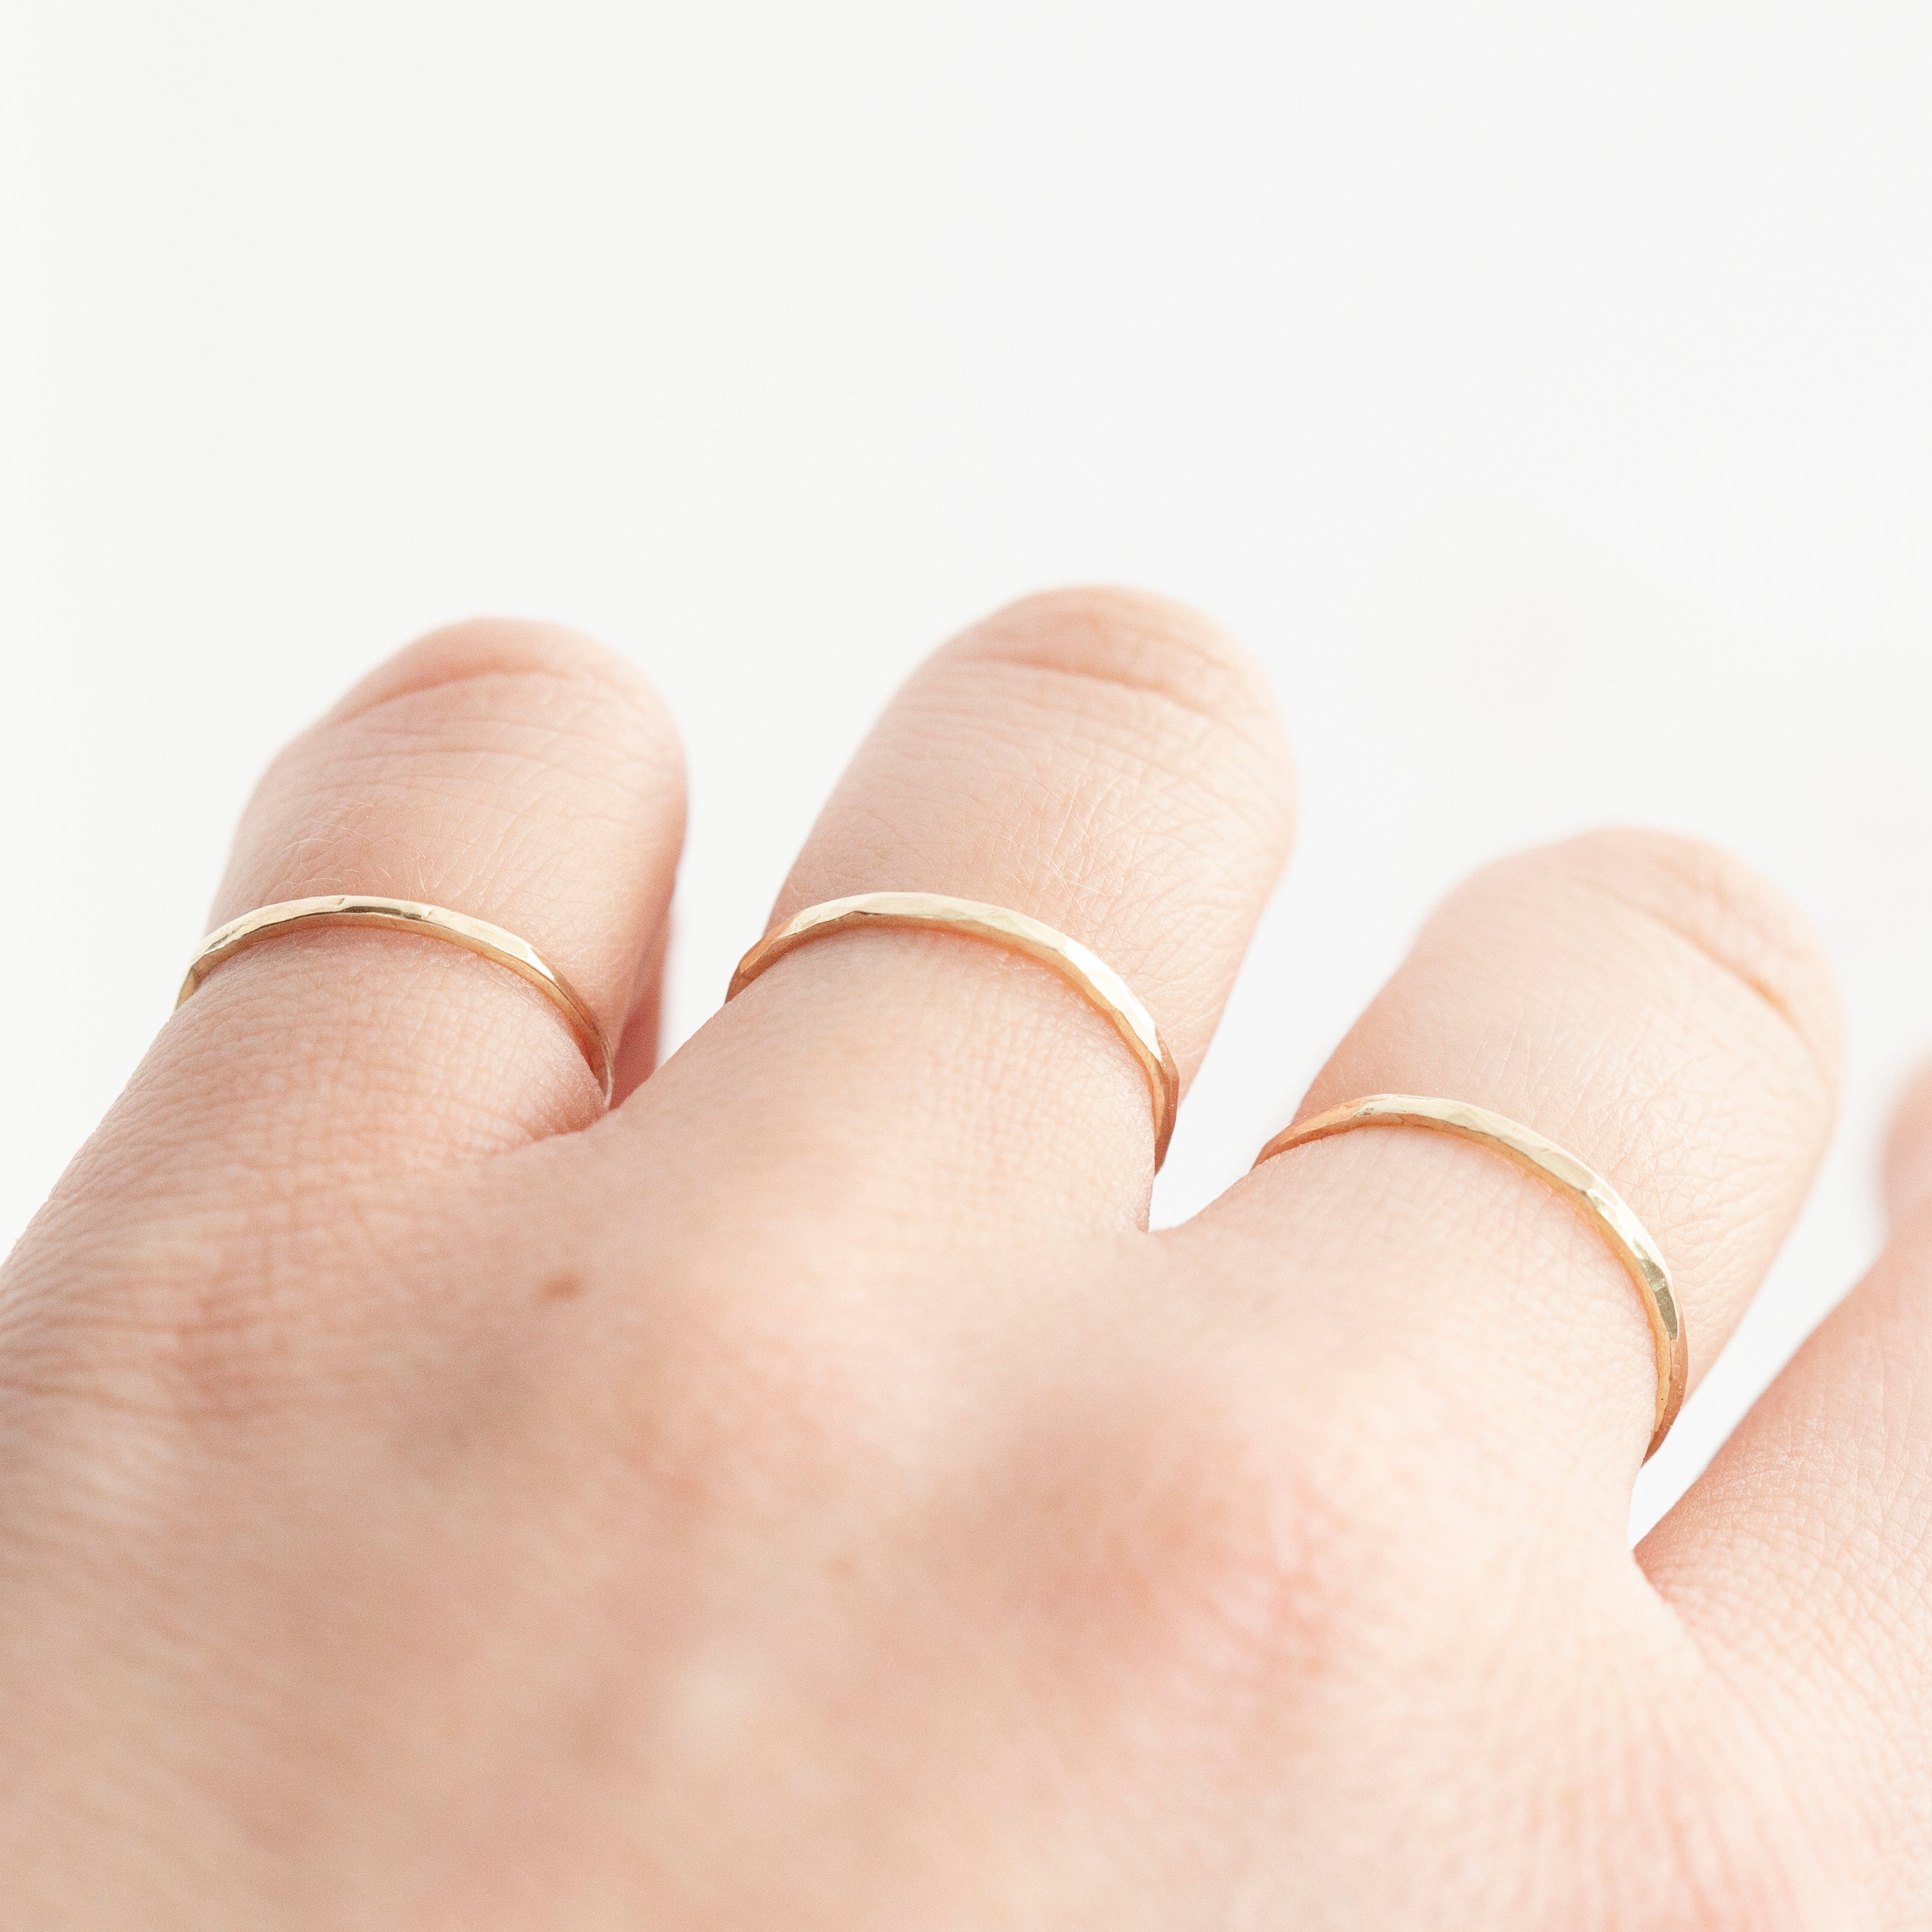 Simple hammered solid 14k gold ring (ready to ship)